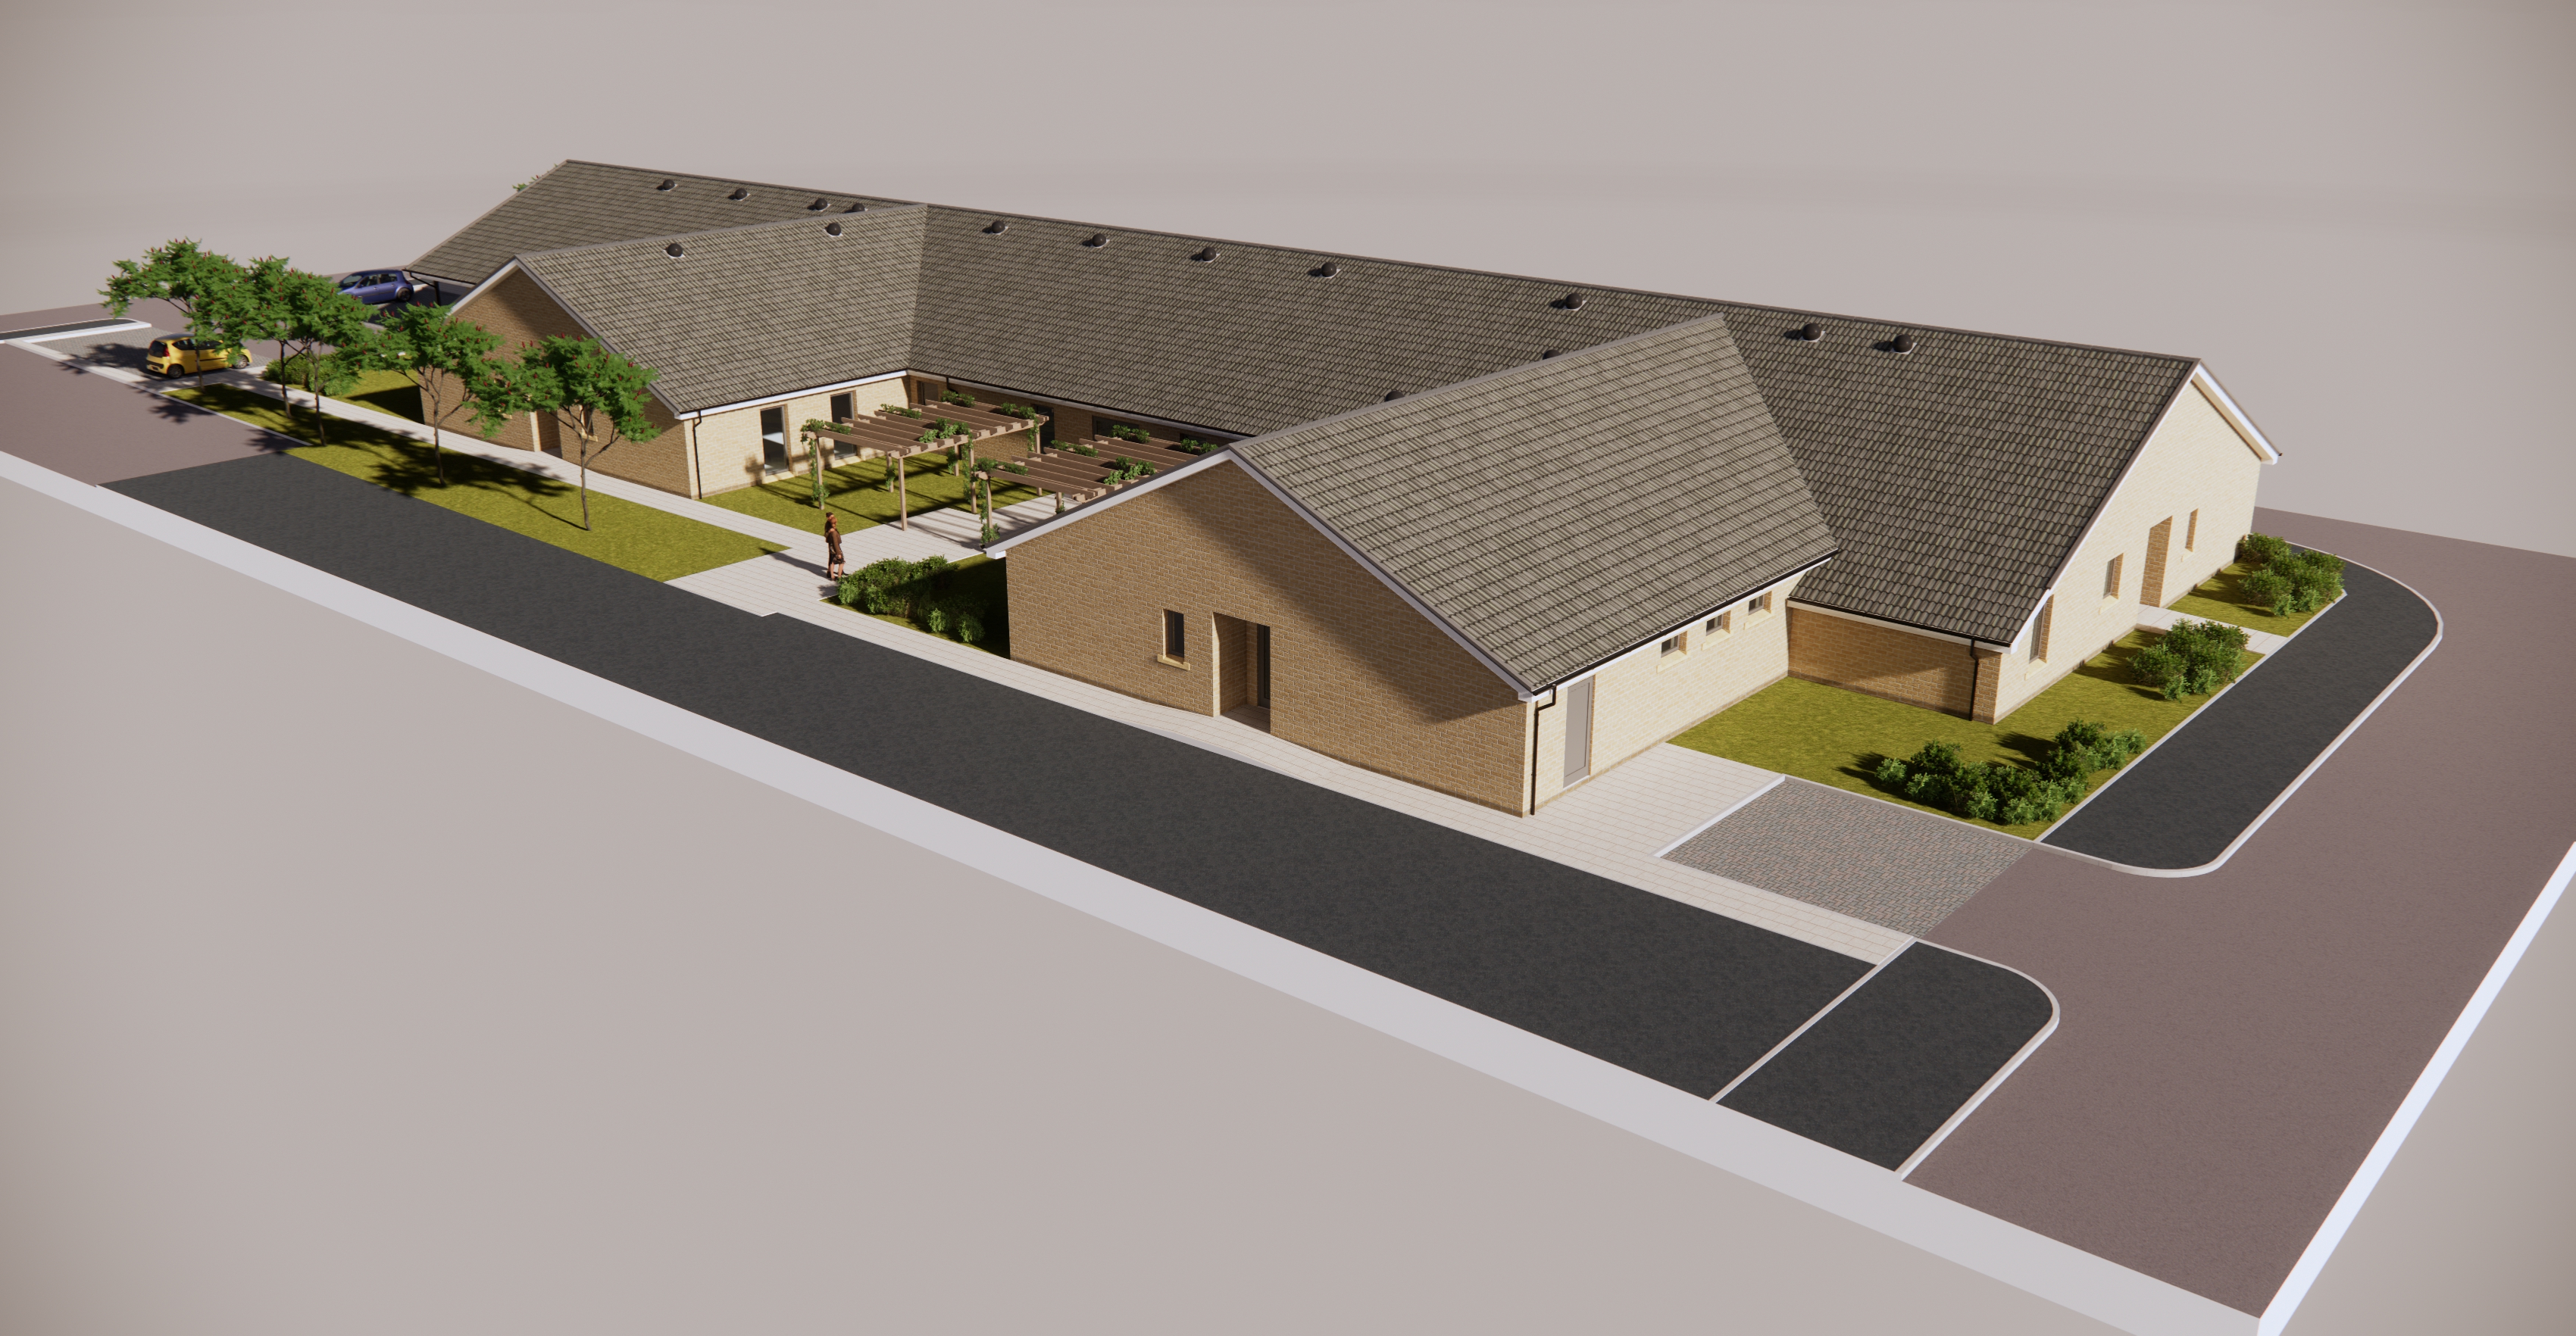 New build nursing home planned for Dundee